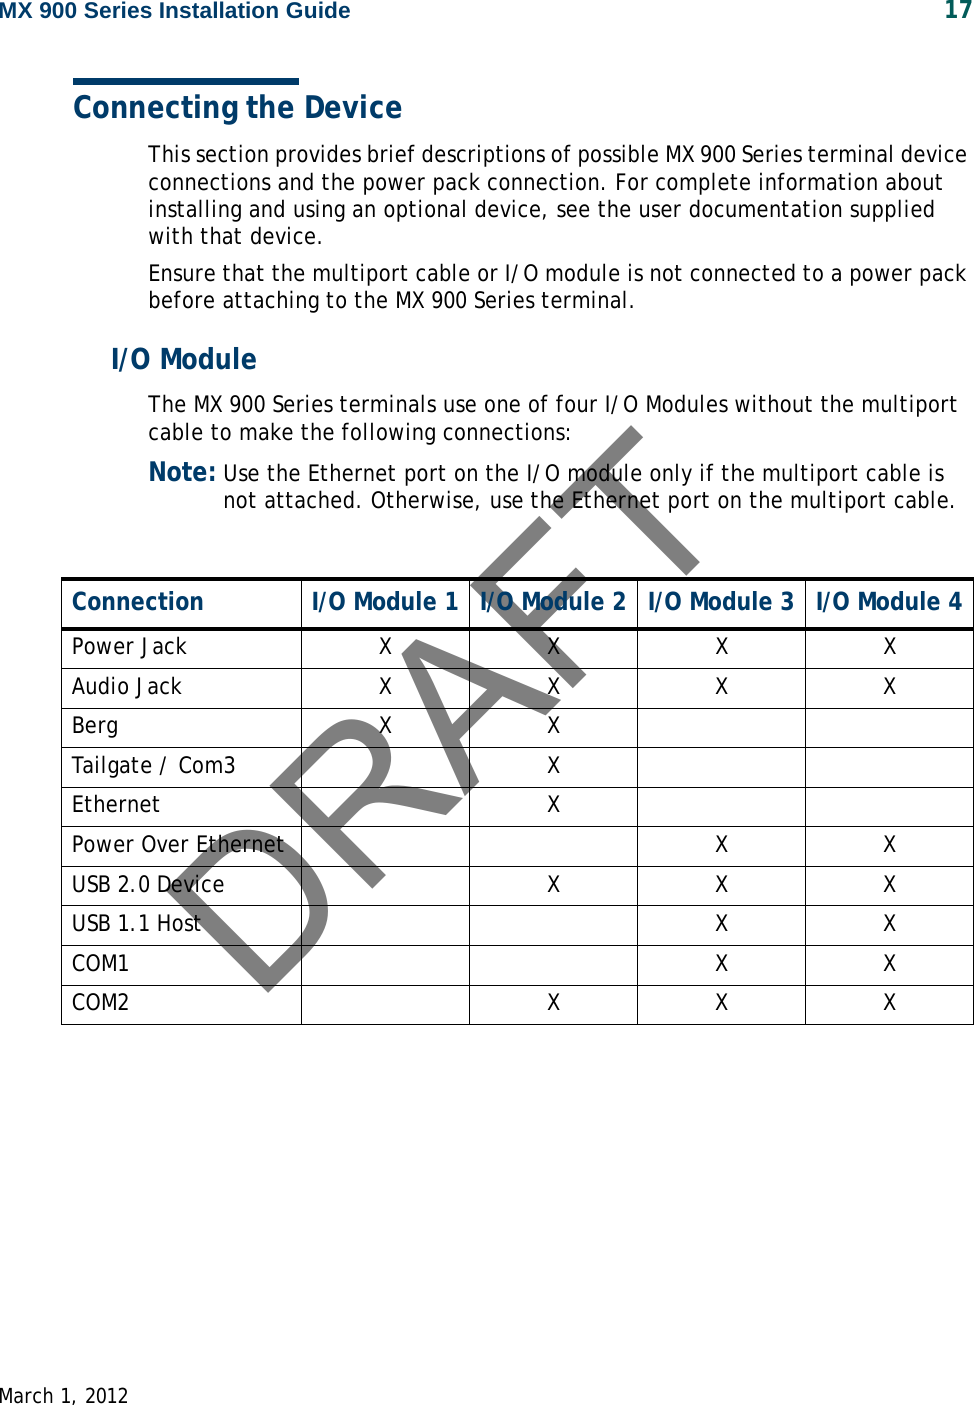 DRAFTMX 900 Series Installation Guide 17 March 1, 2012Connecting the DeviceThis section provides brief descriptions of possible MX 900 Series terminal device connections and the power pack connection. For complete information about installing and using an optional device, see the user documentation supplied with that device.Ensure that the multiport cable or I/O module is not connected to a power pack before attaching to the MX 900 Series terminal.I/O ModuleThe MX 900 Series terminals use one of four I/O Modules without the multiport cable to make the following connections: Note: Use the Ethernet port on the I/O module only if the multiport cable is not attached. Otherwise, use the Ethernet port on the multiport cable.Connection I/O Module 1 I/O Module 2 I/O Module 3 I/O Module 4Power Jack XXXXAudio Jack XXXXBerg X XTailgate / Com3  XEthernet XPower Over Ethernet X XUSB 2.0 Device X X XUSB 1.1 Host X XCOM1 X XCOM2 XXX